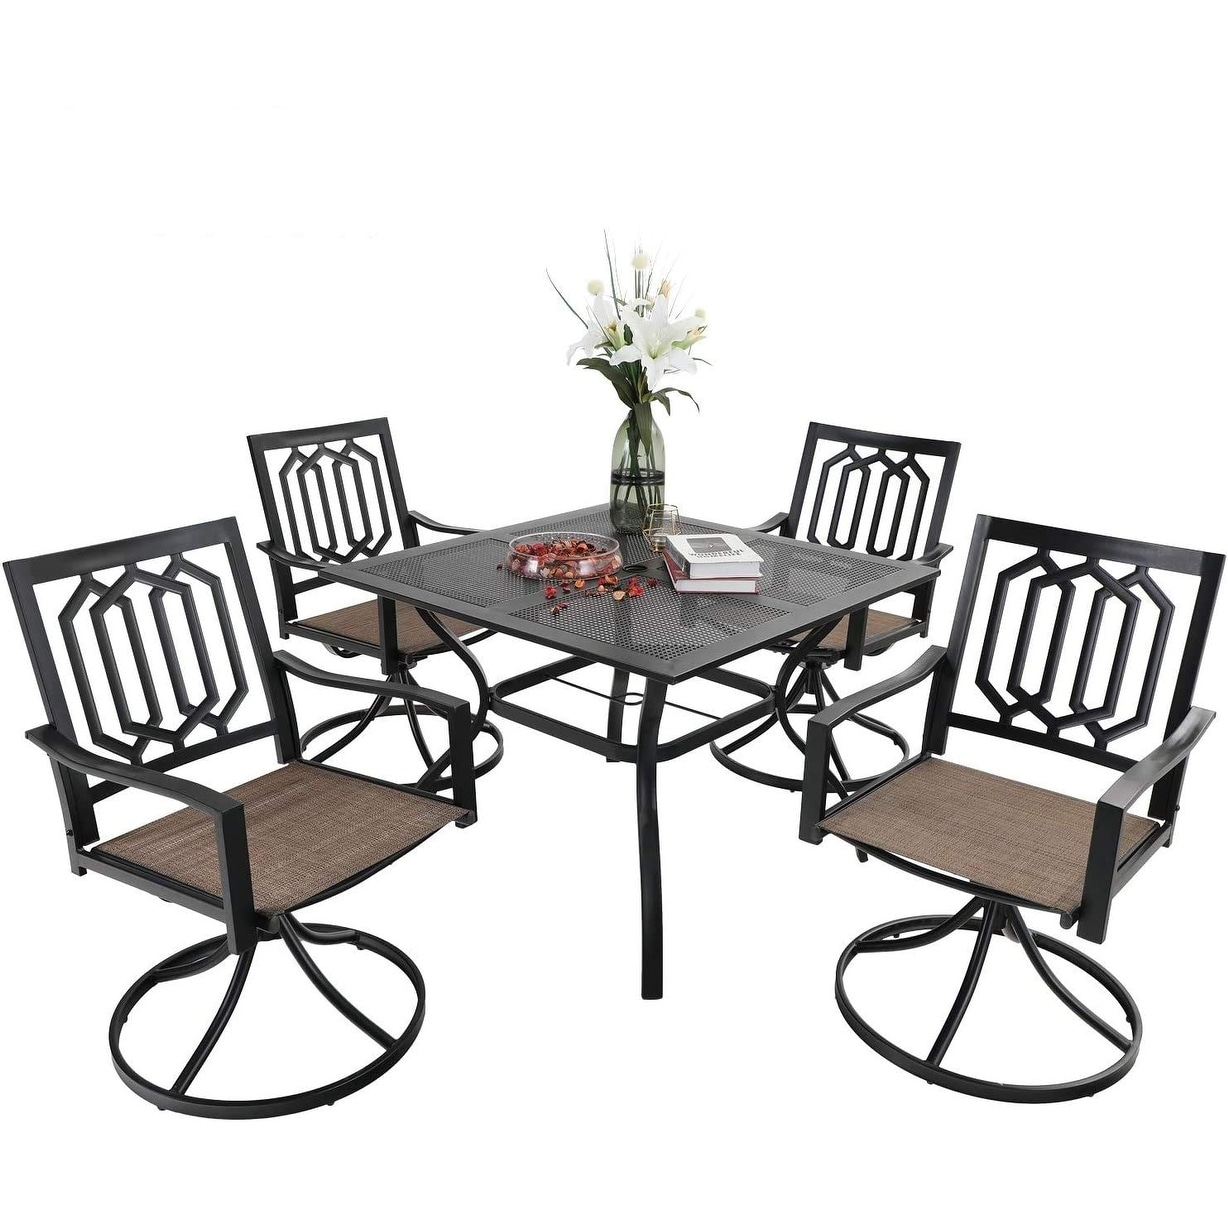 Mfstudio 5 Piece Patio Dining Set, 4 Sling Swivel Chairs And Multi Role Metal 37inch Square Table With 1.57" Umbrella Hole